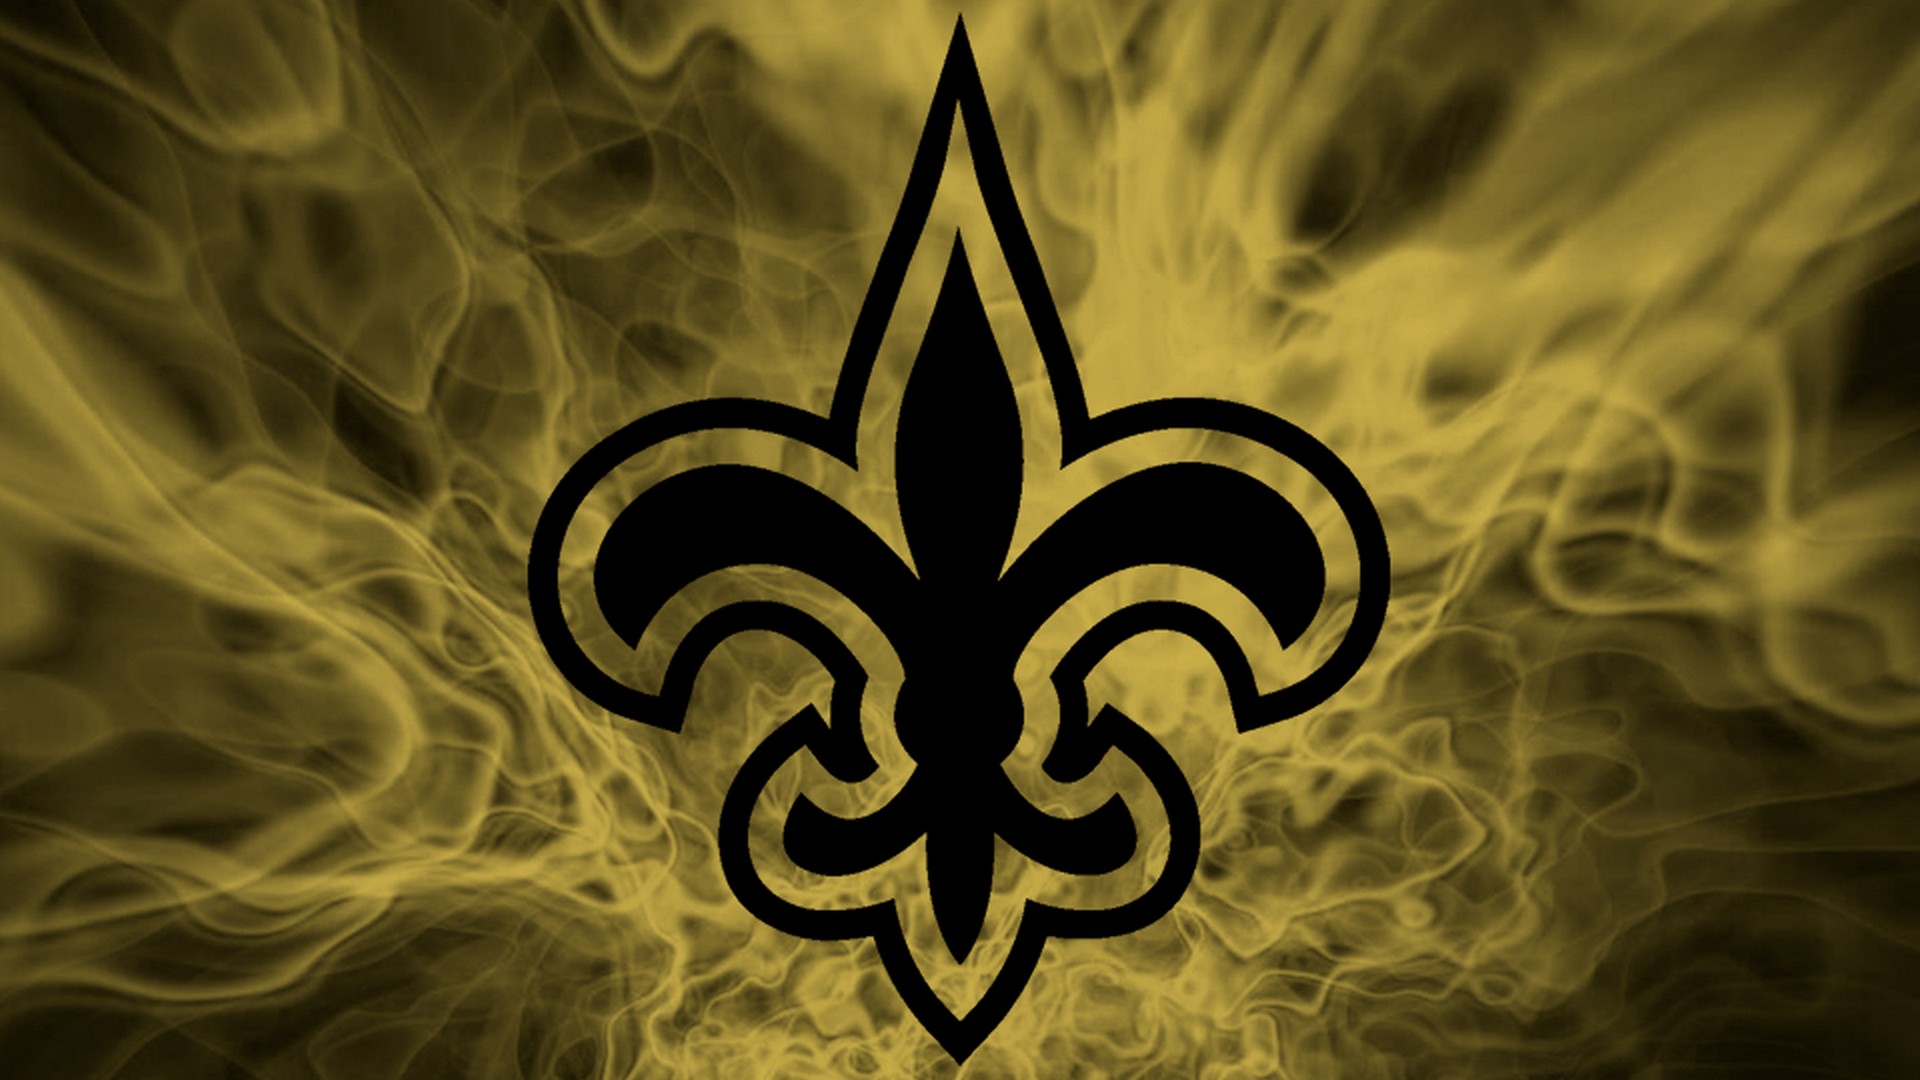 HD New Orleans Saints NFL Wallpapers With Resolution 1920X1080 pixel. You can make this wallpaper for your Mac or Windows Desktop Background, iPhone, Android or Tablet and another Smartphone device for free